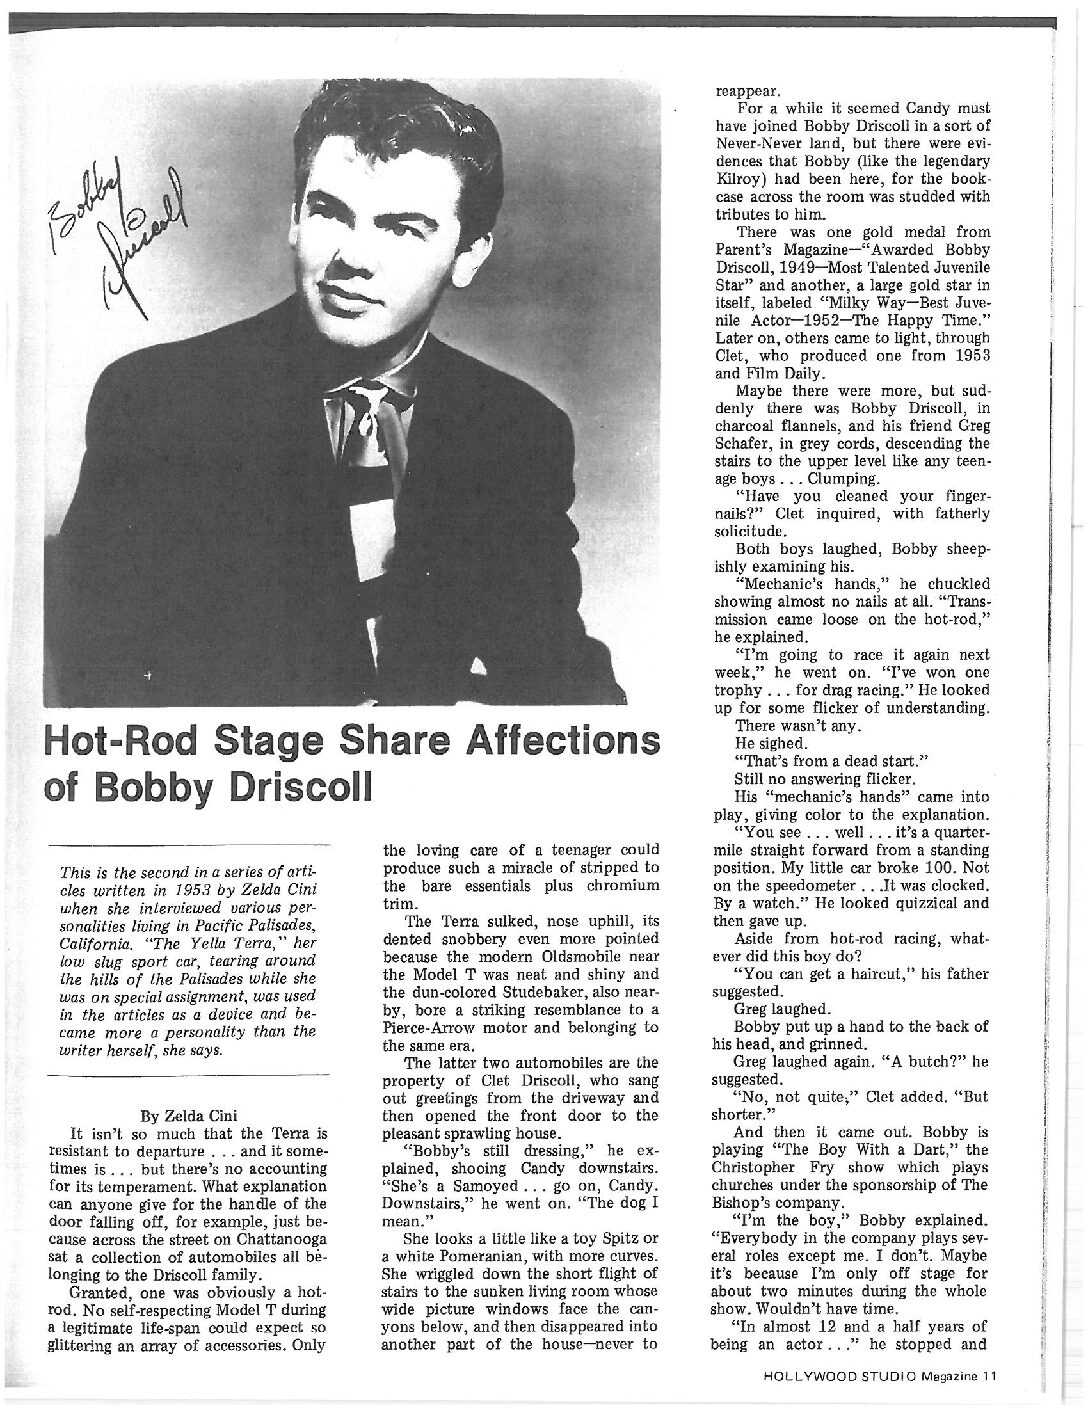 Hot-Rod Stage Share Affections of Bobby Driscoll (1954) | Bobby Driscoll